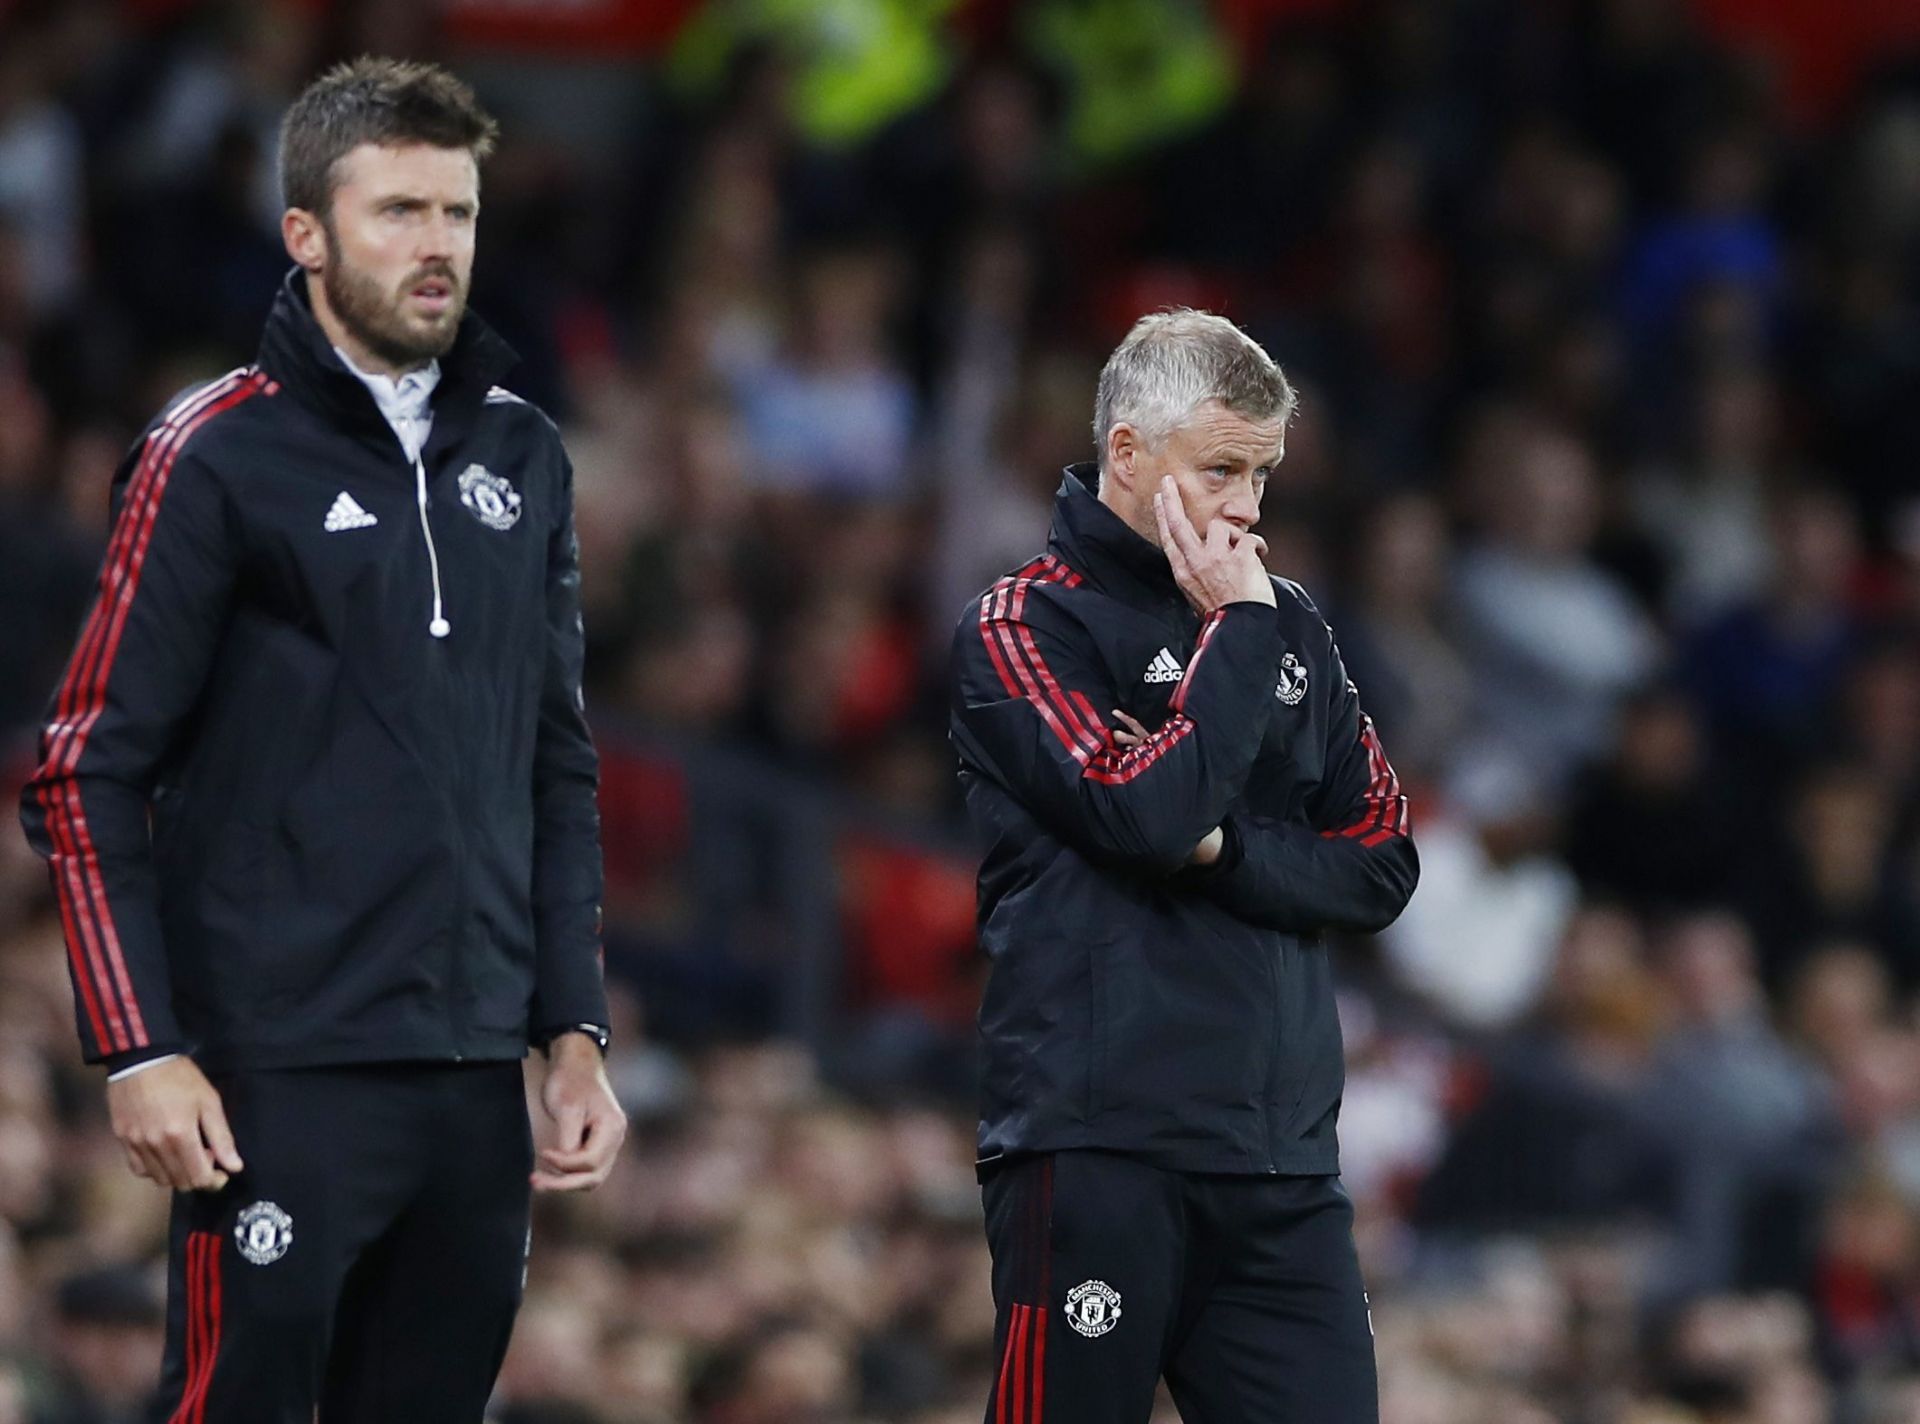 Michael Carrick has taken over managerial duties from Ole Gunnar Solskjaer after the latter got sacked. Image Credits: Reuters